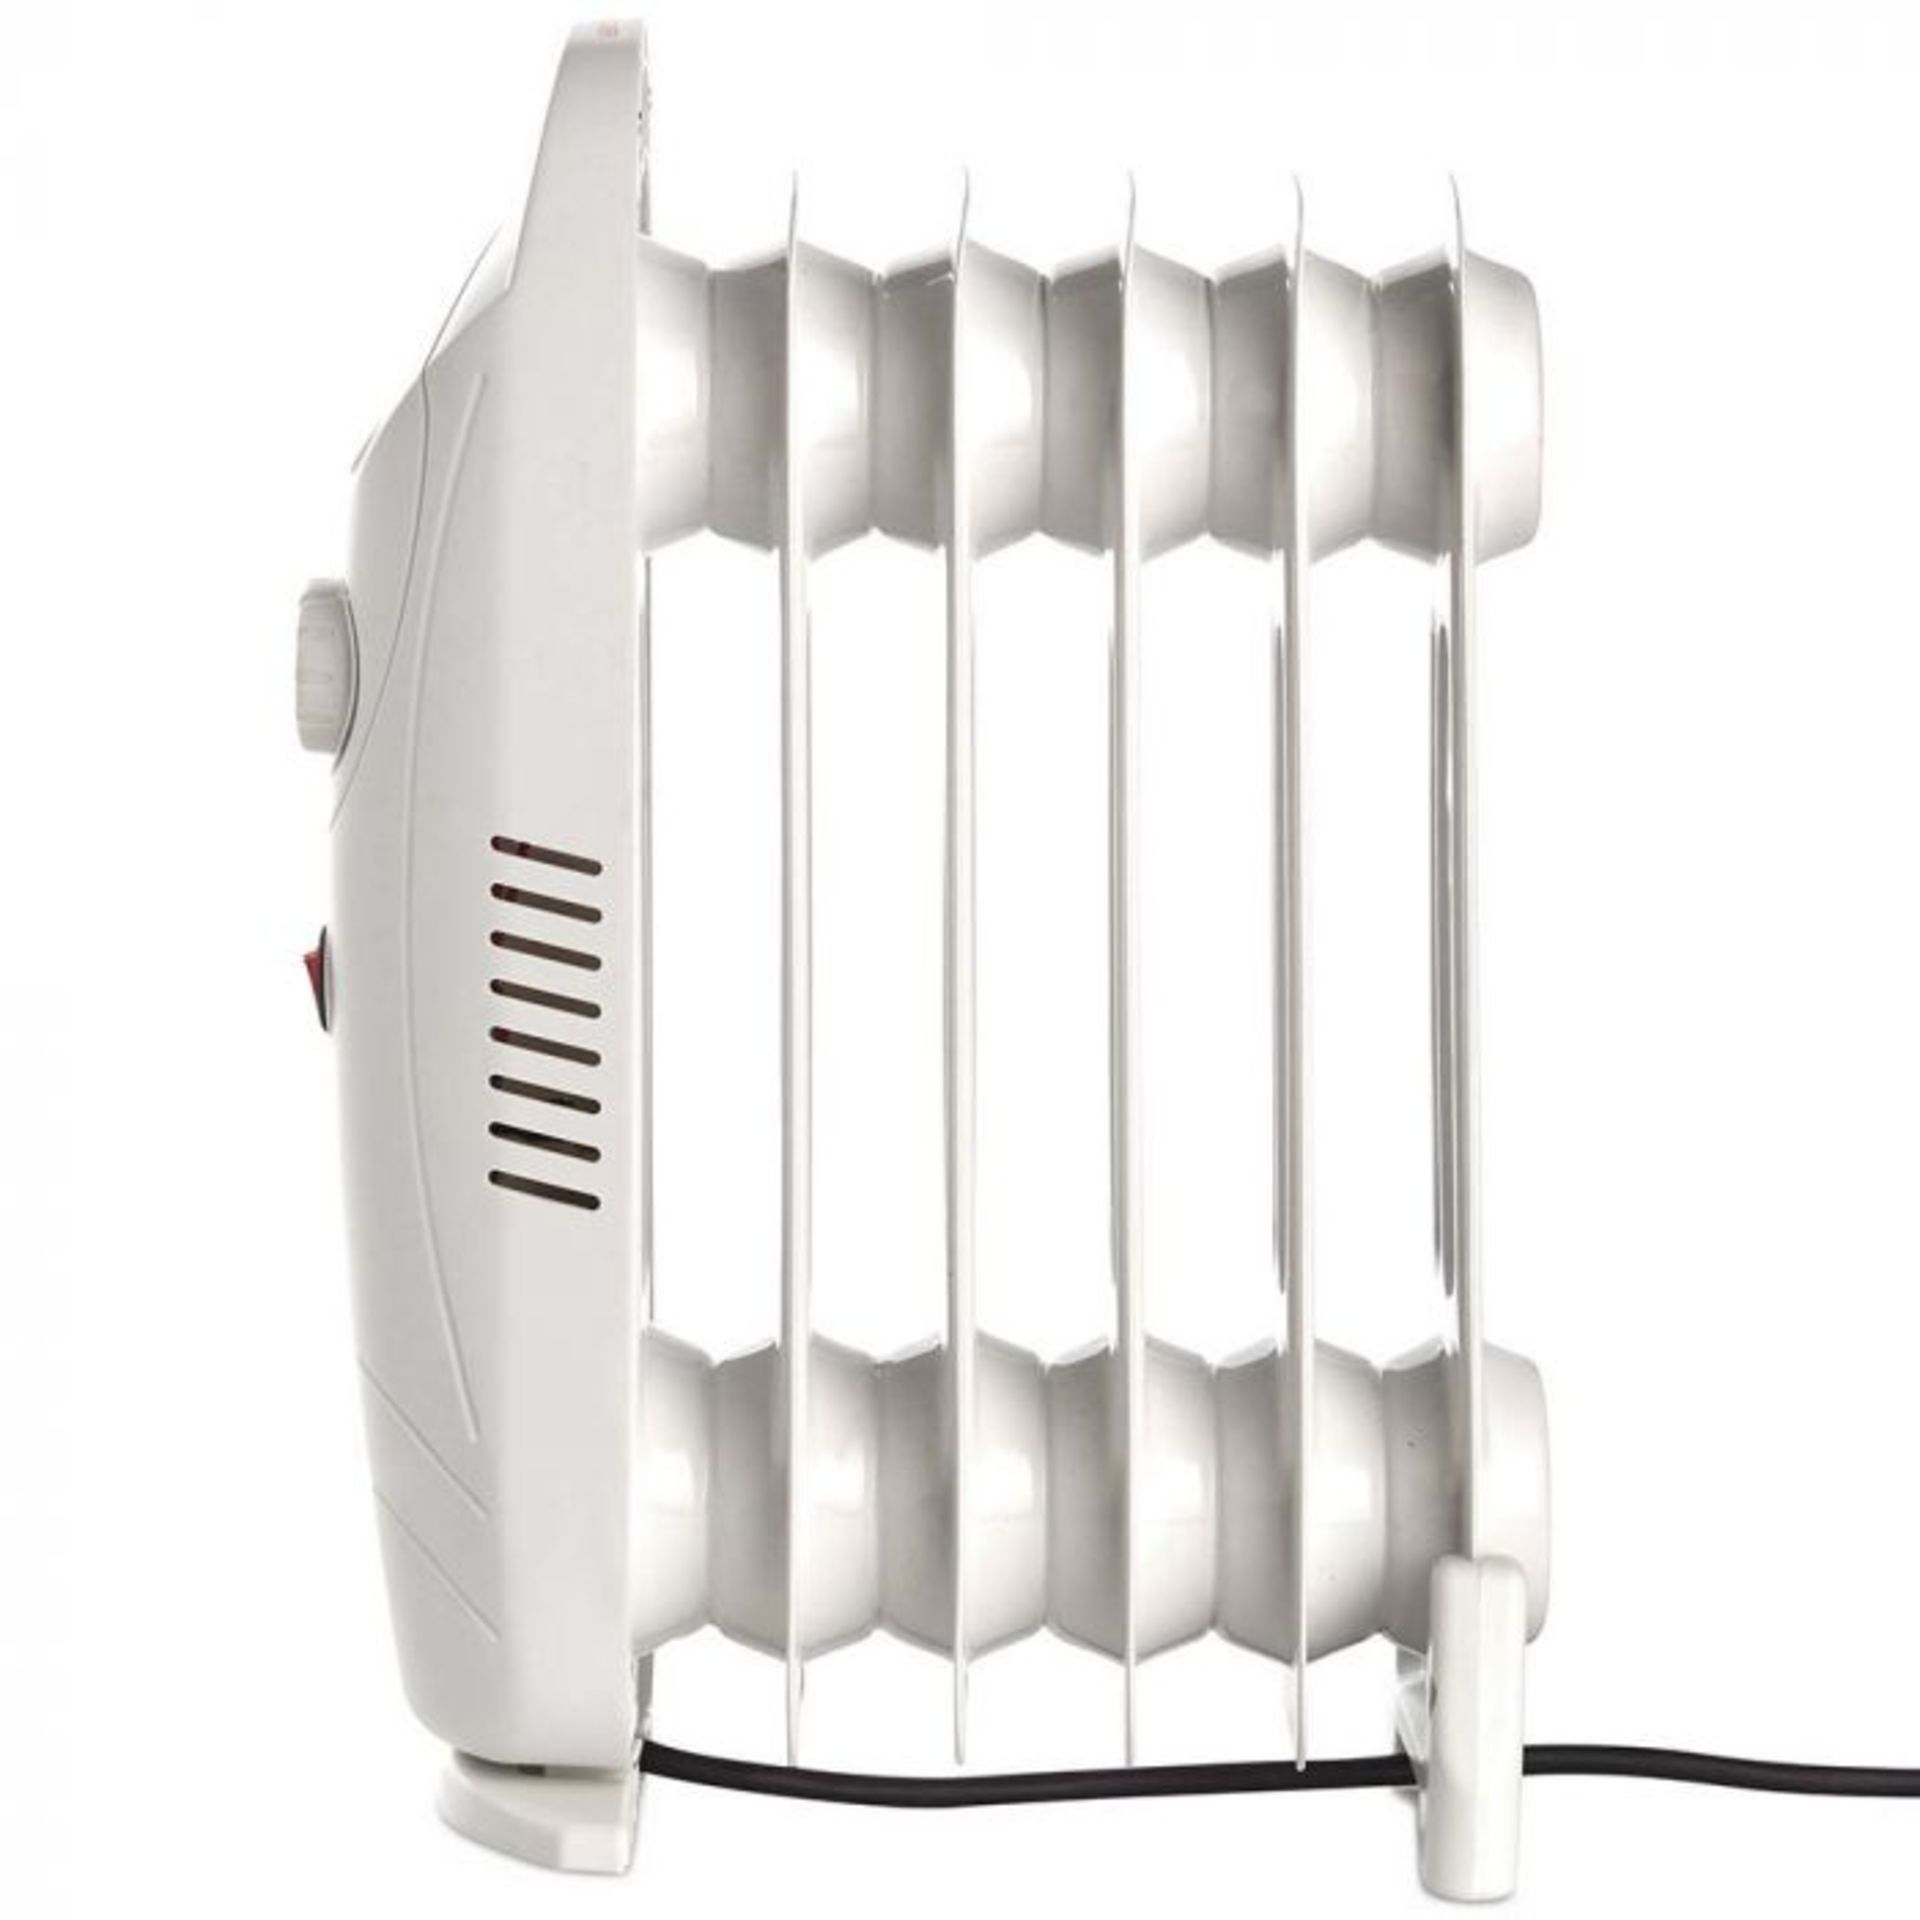 (S72) 6 Fin 800W Oil Filled Radiator - White Compact yet powerful 800W radiator with 6 oil-fil... - Image 3 of 3